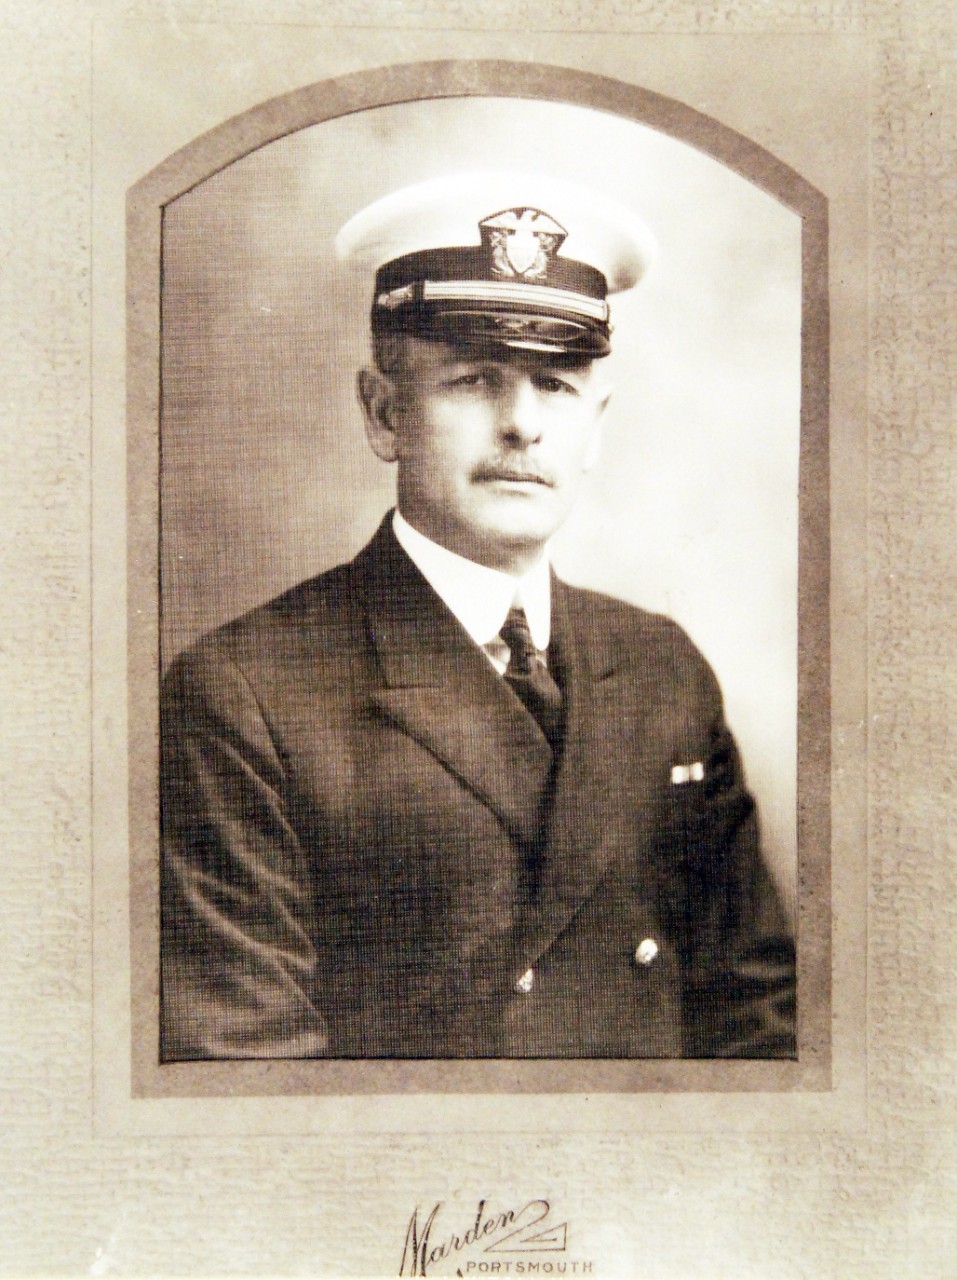 80-G-424929:  Lieutenant John A. Lord, USN, Officer in Charge of Rebuiling, 1927.     Photographed at Boston Navy Yard, Massachusetts.     Photograph – July 1927.   Official U.S. Navy Photograph, now in the collections of the National Archives.   (2017/08/01).  